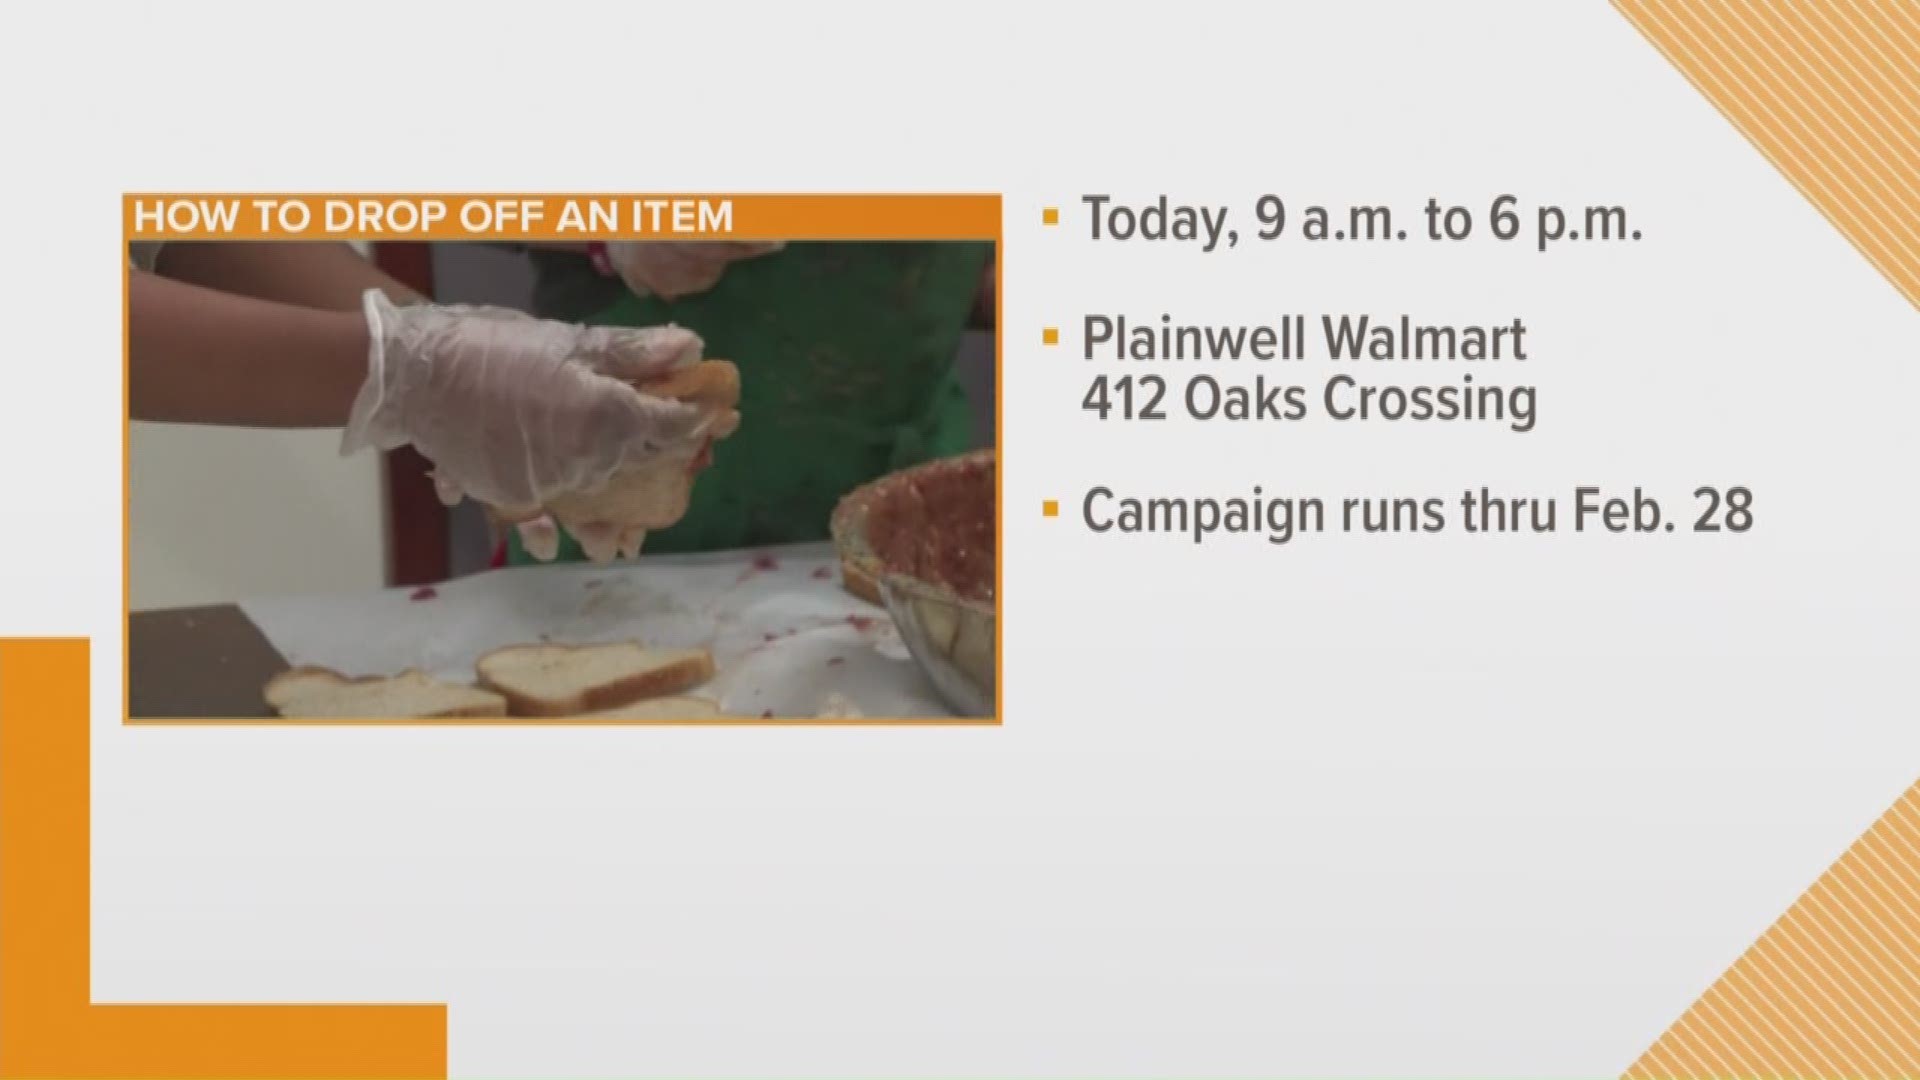 Allegan County asking for peanut butter donations